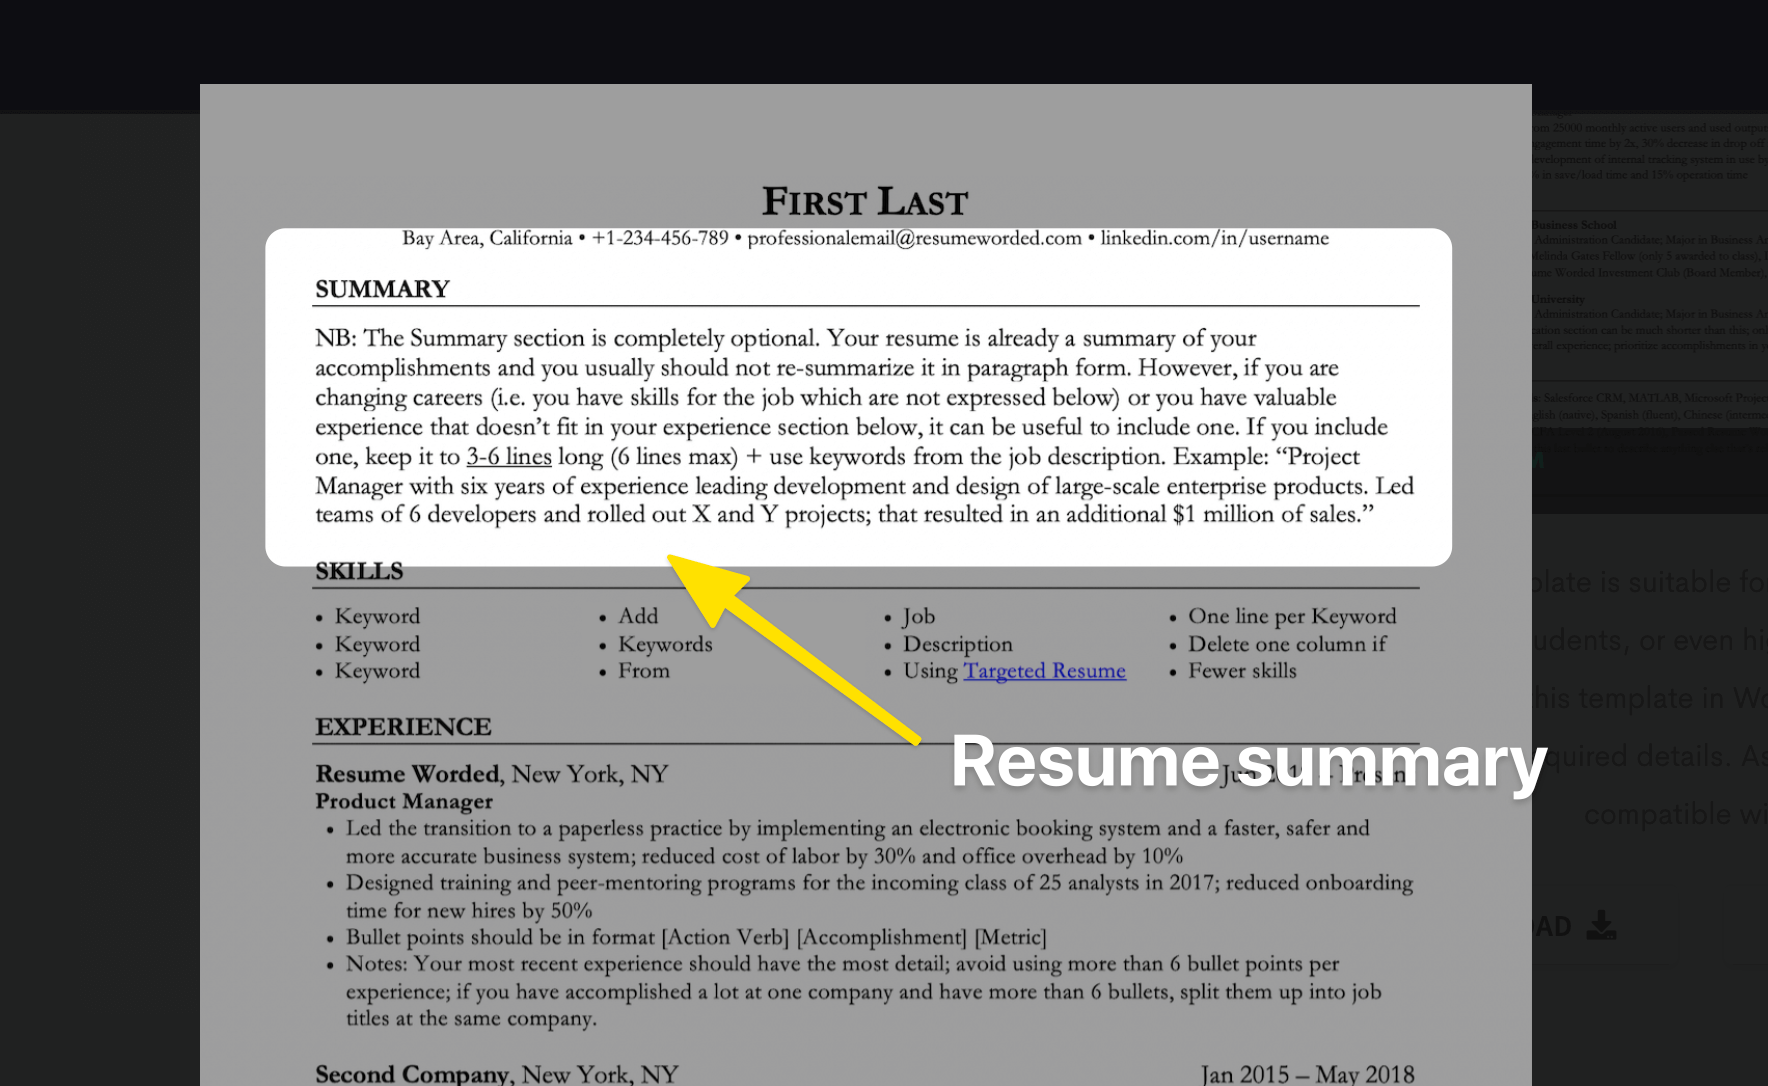 How to Write a Resume Summary if You're Changing Careers